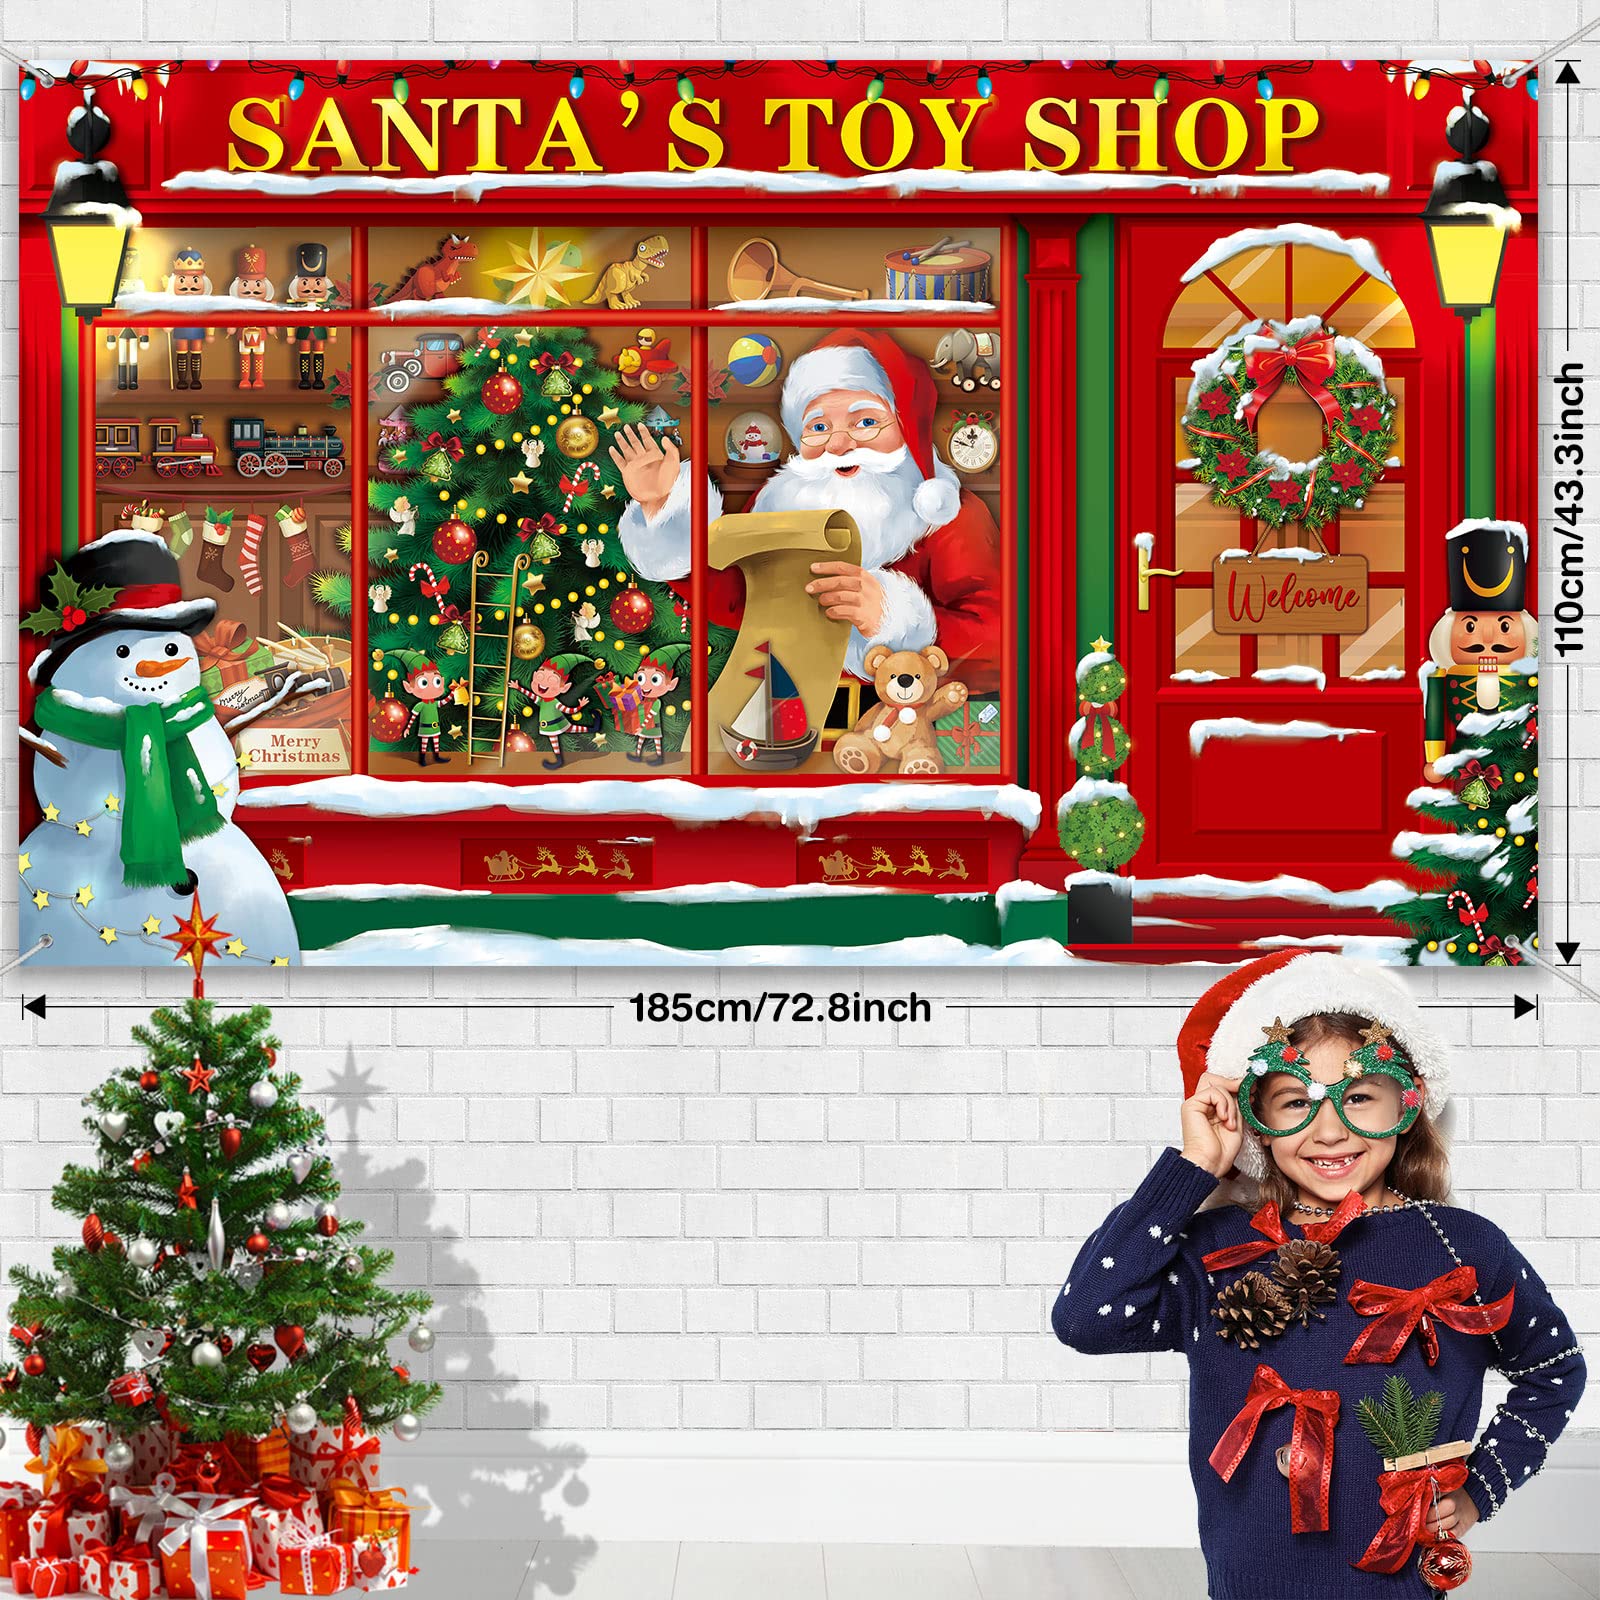 Christmas Backdrop Banner - Santa's Toy Shop Store Background for Holiday Party Photos, 72.8 x 43.3 Inches (Classic)